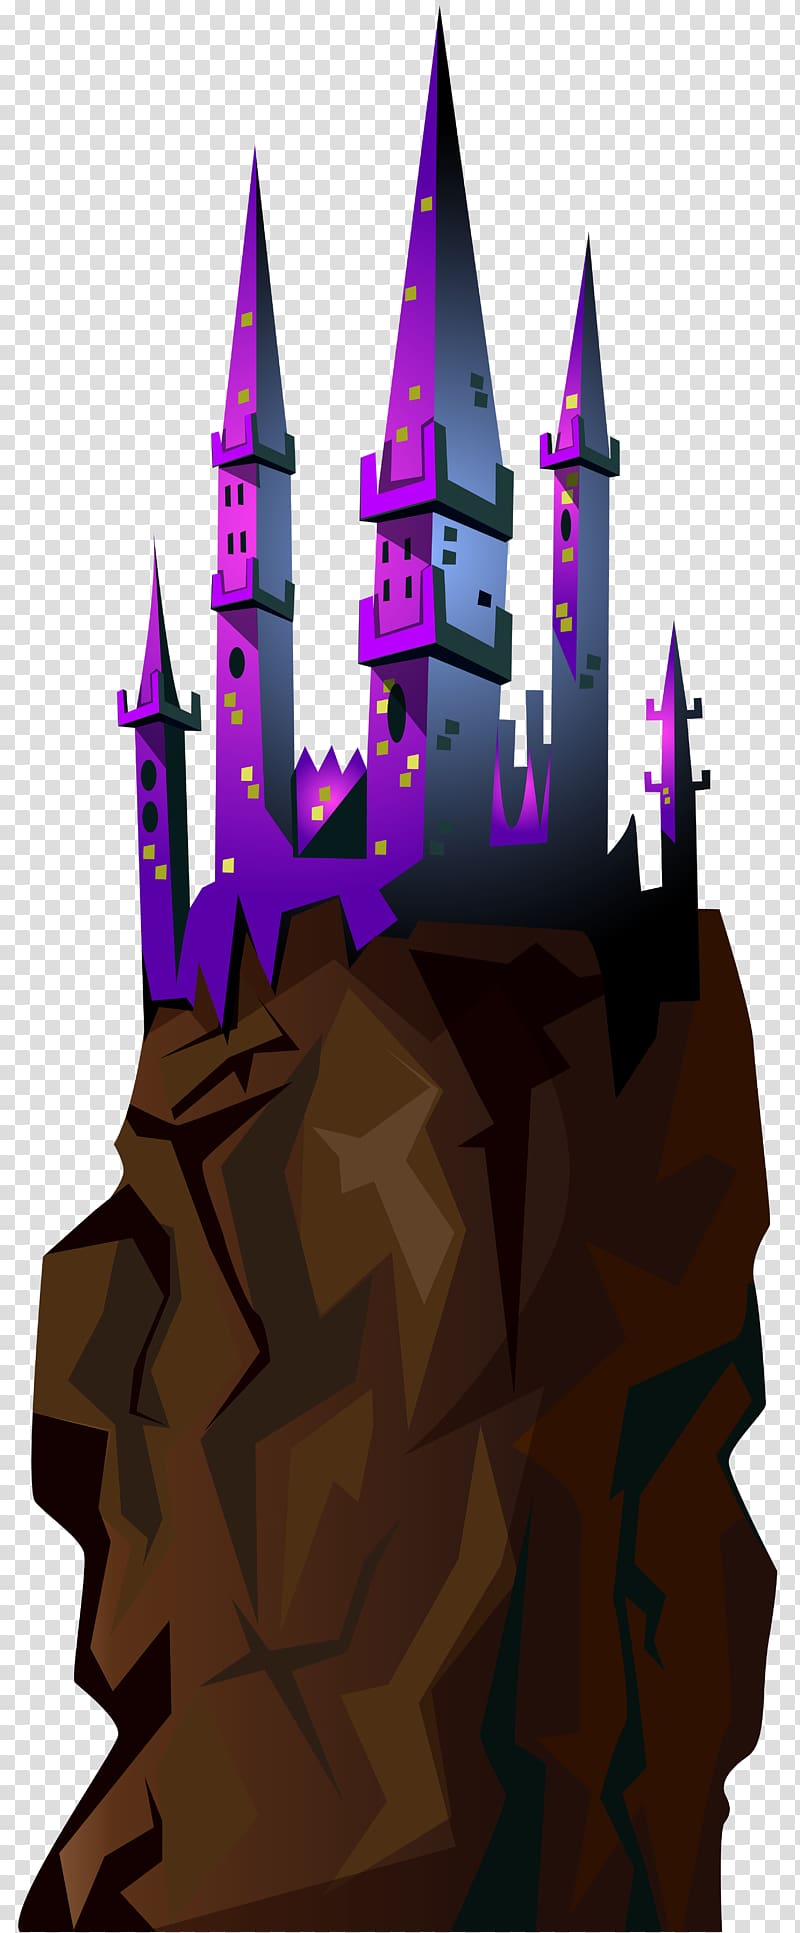 file formats Lossless compression, Castle on the Rock transparent background PNG clipart